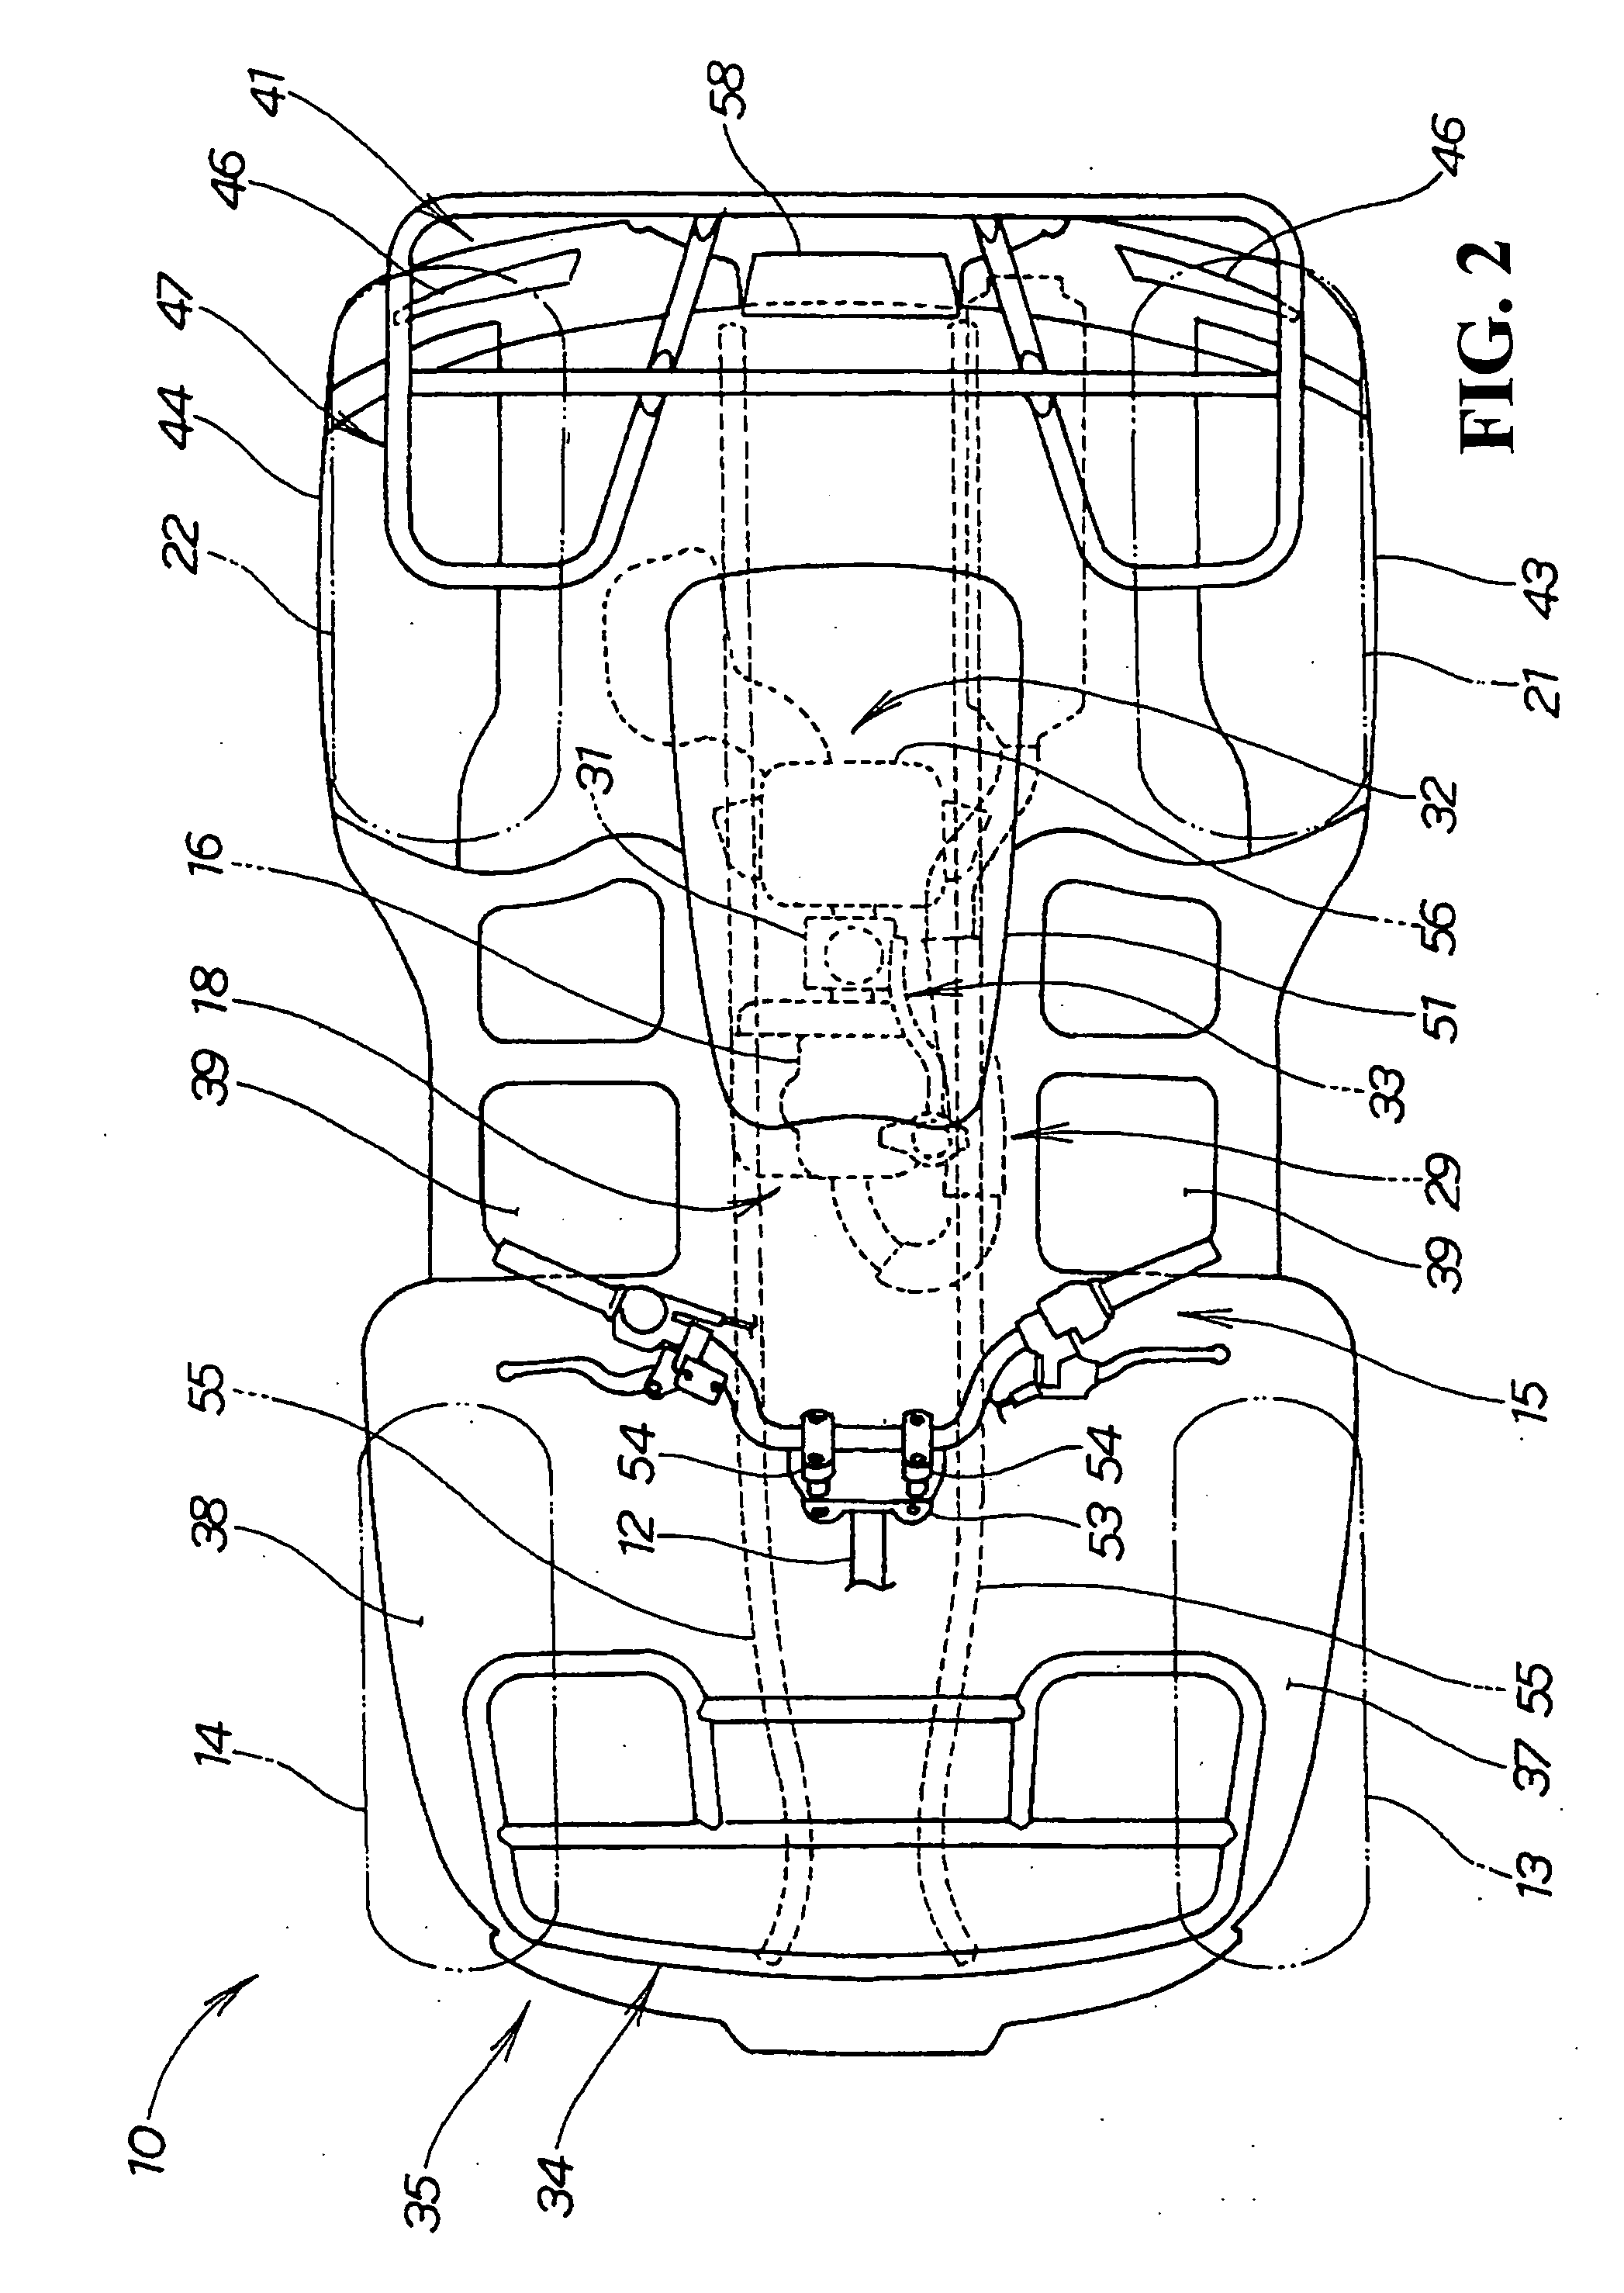 Structure for supporting headlamps for vehicle